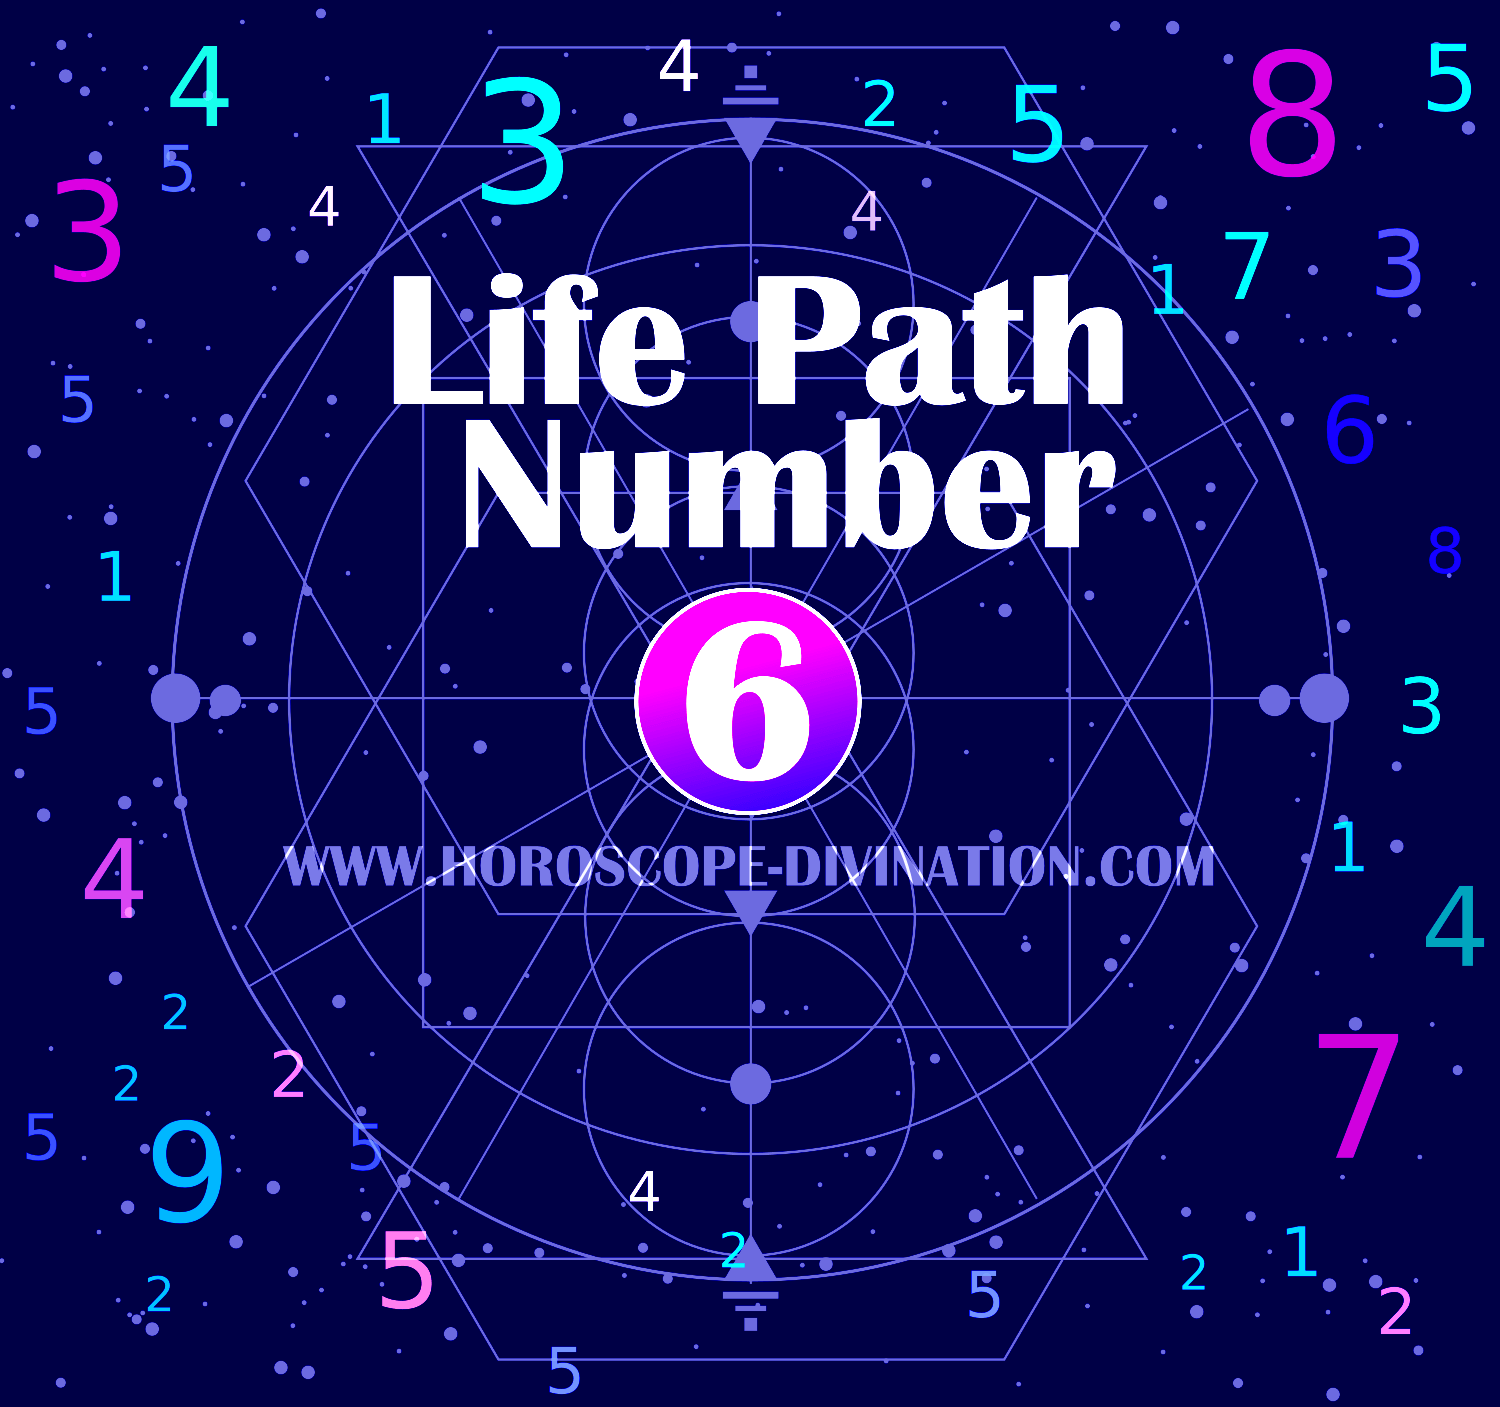 Life Path Number 6 - Numerology